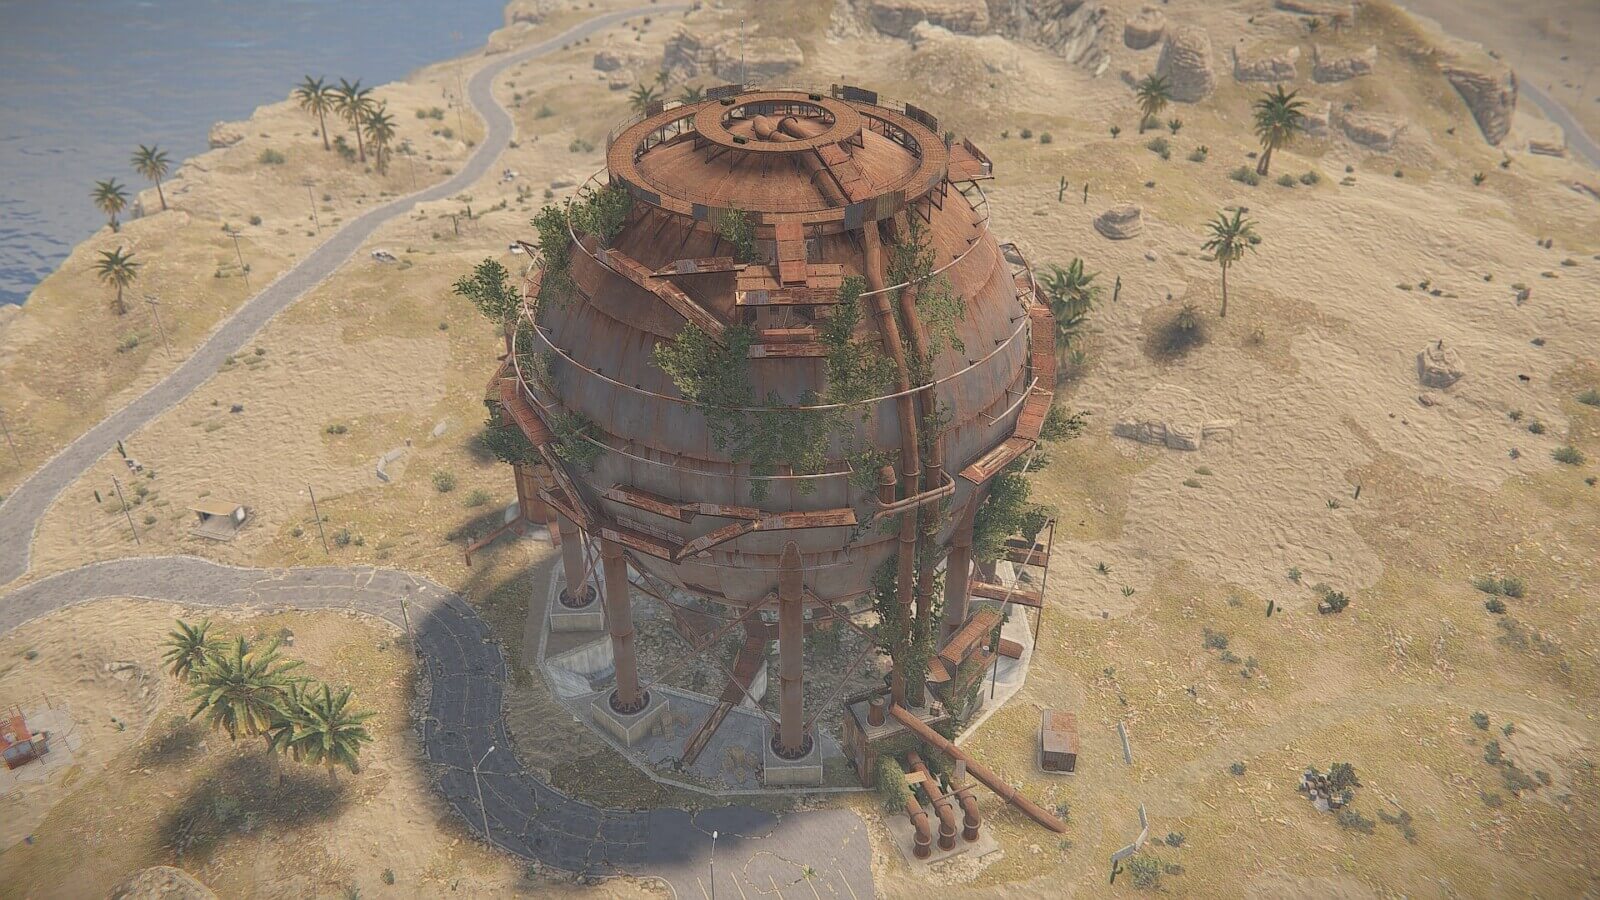 The other side view of the Rust sphere tank (Dome) monument.